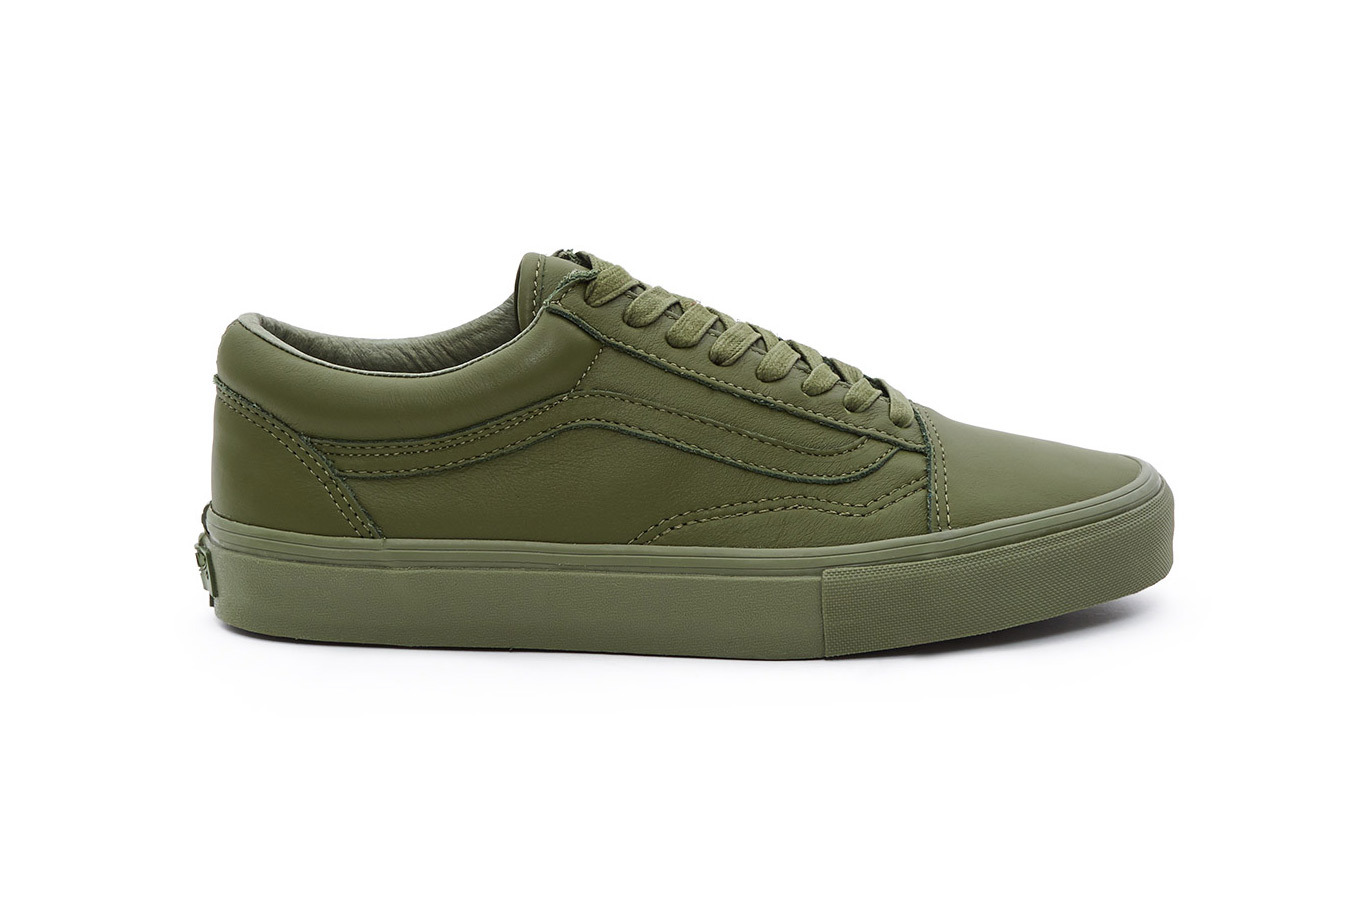 opening-ceremony-vans-leather-mono-pack-3